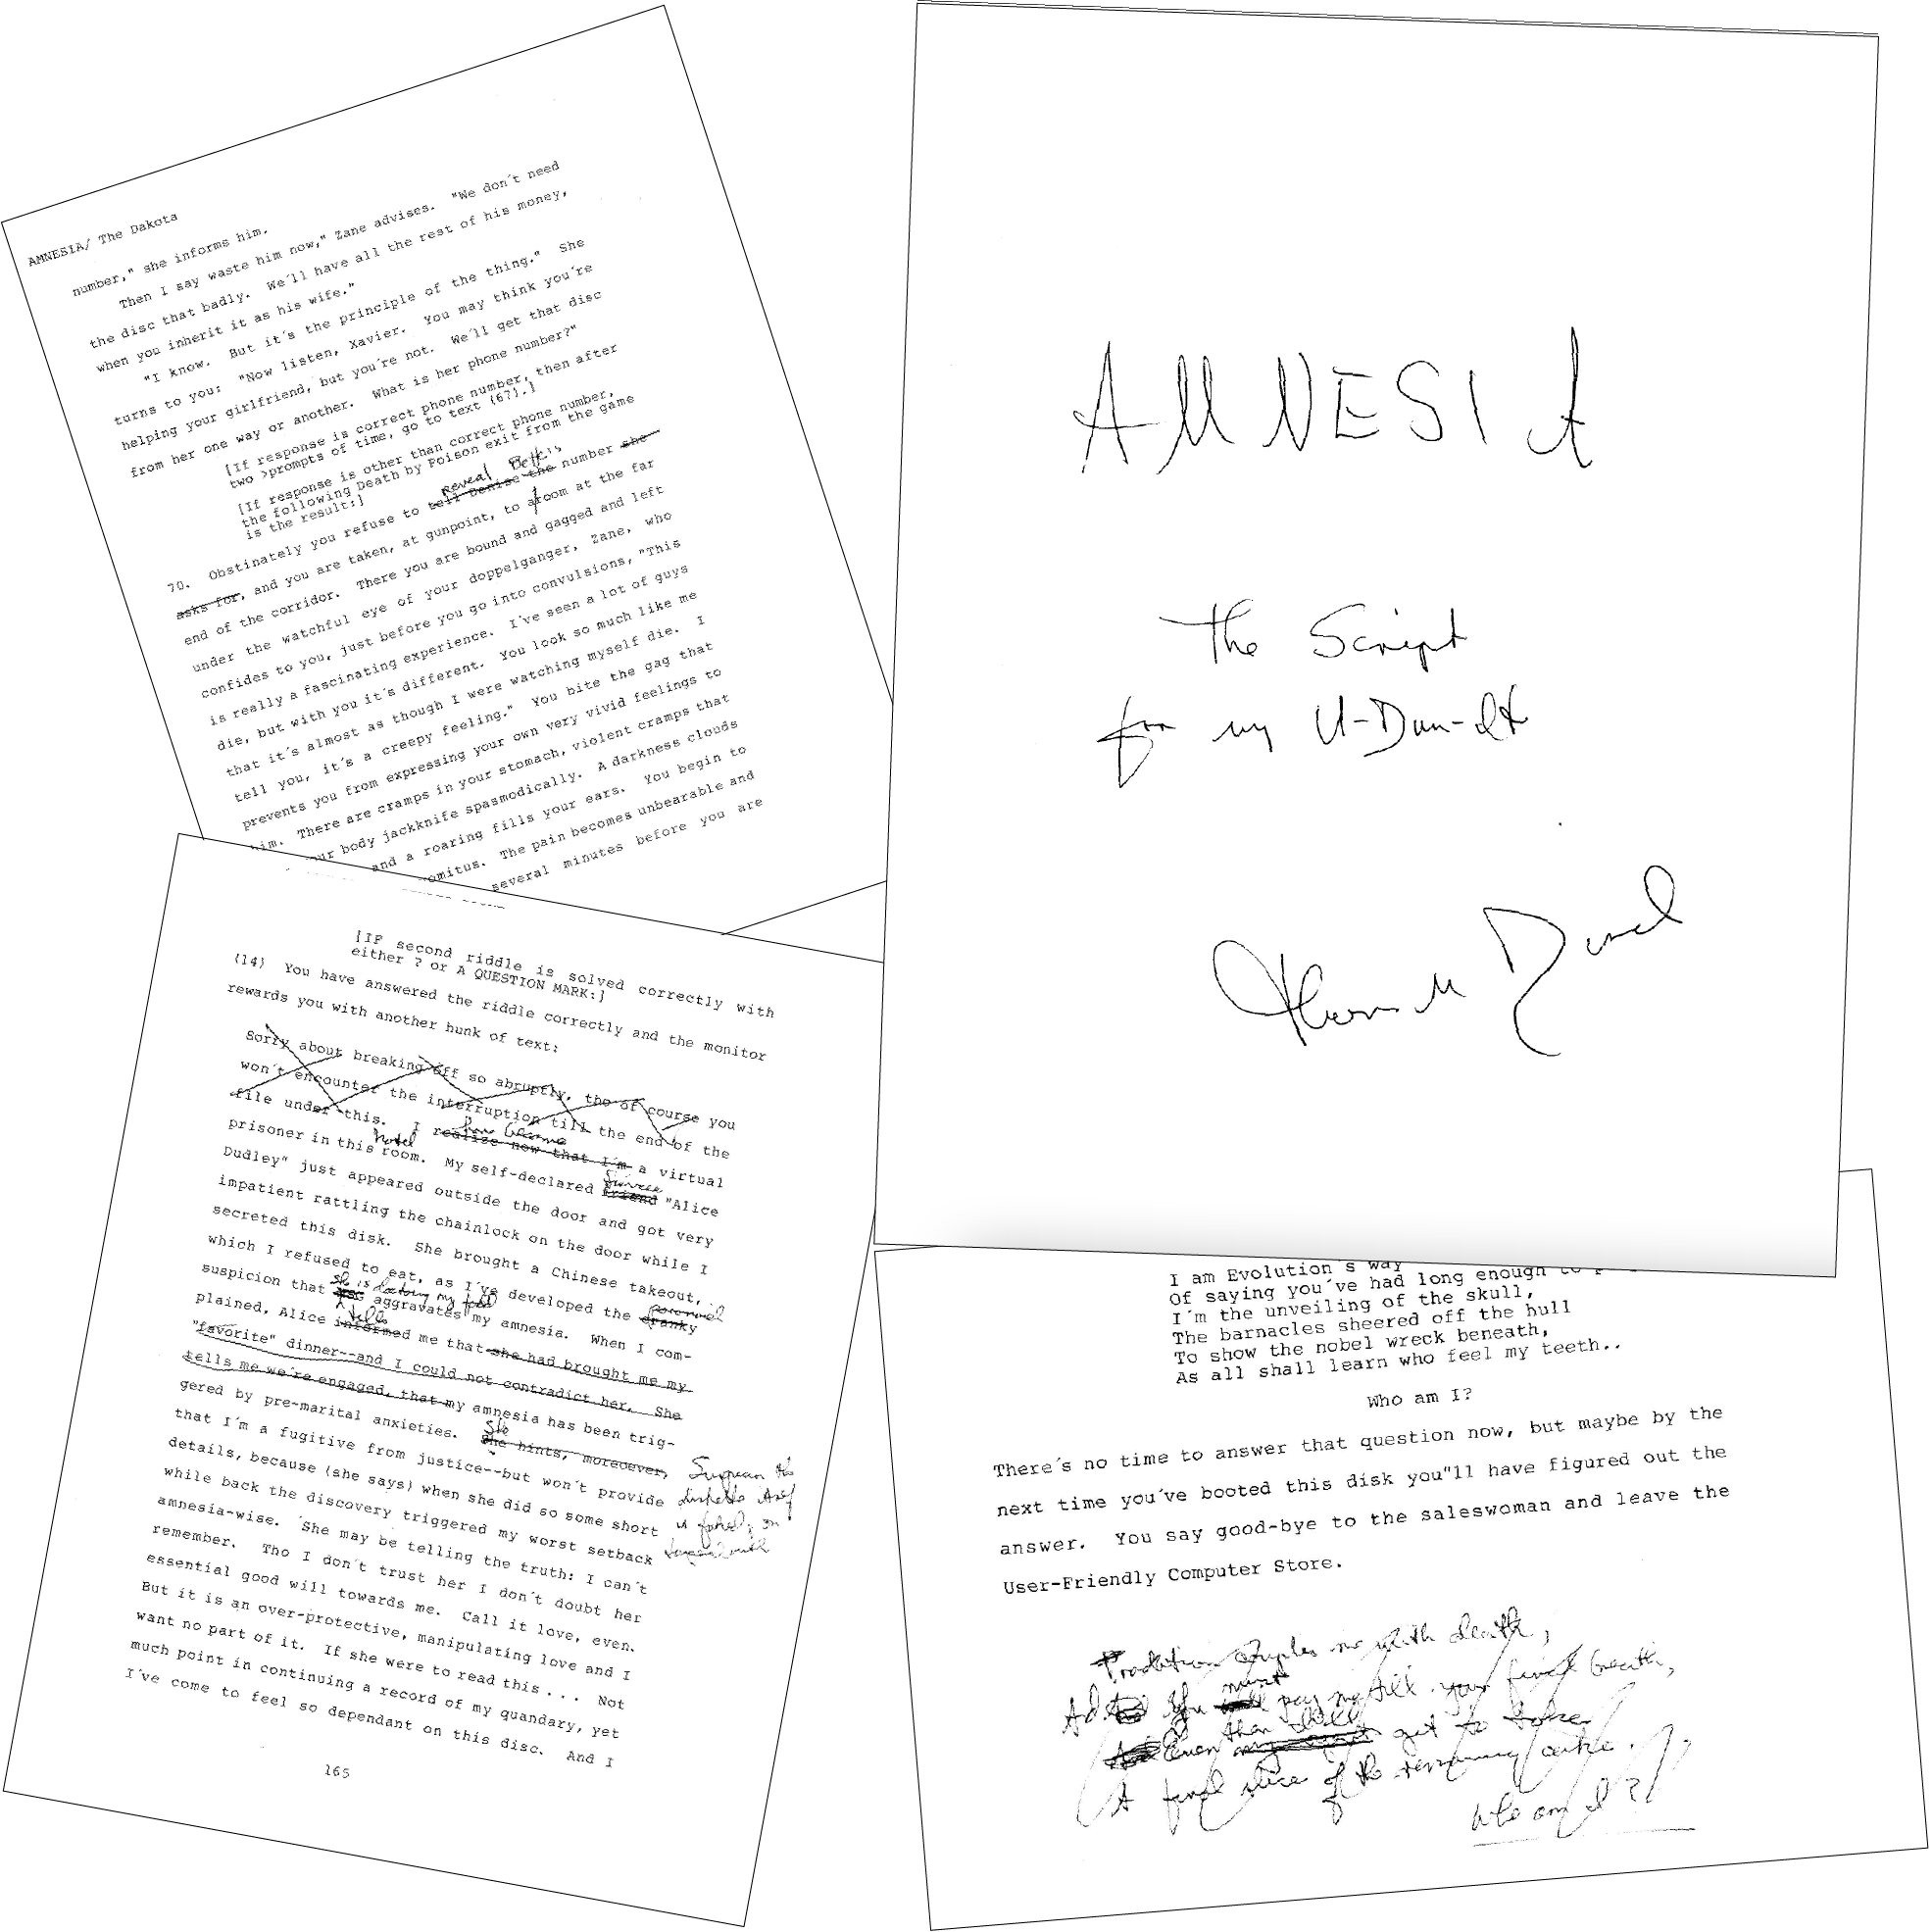 pages from Disch's original manuscript